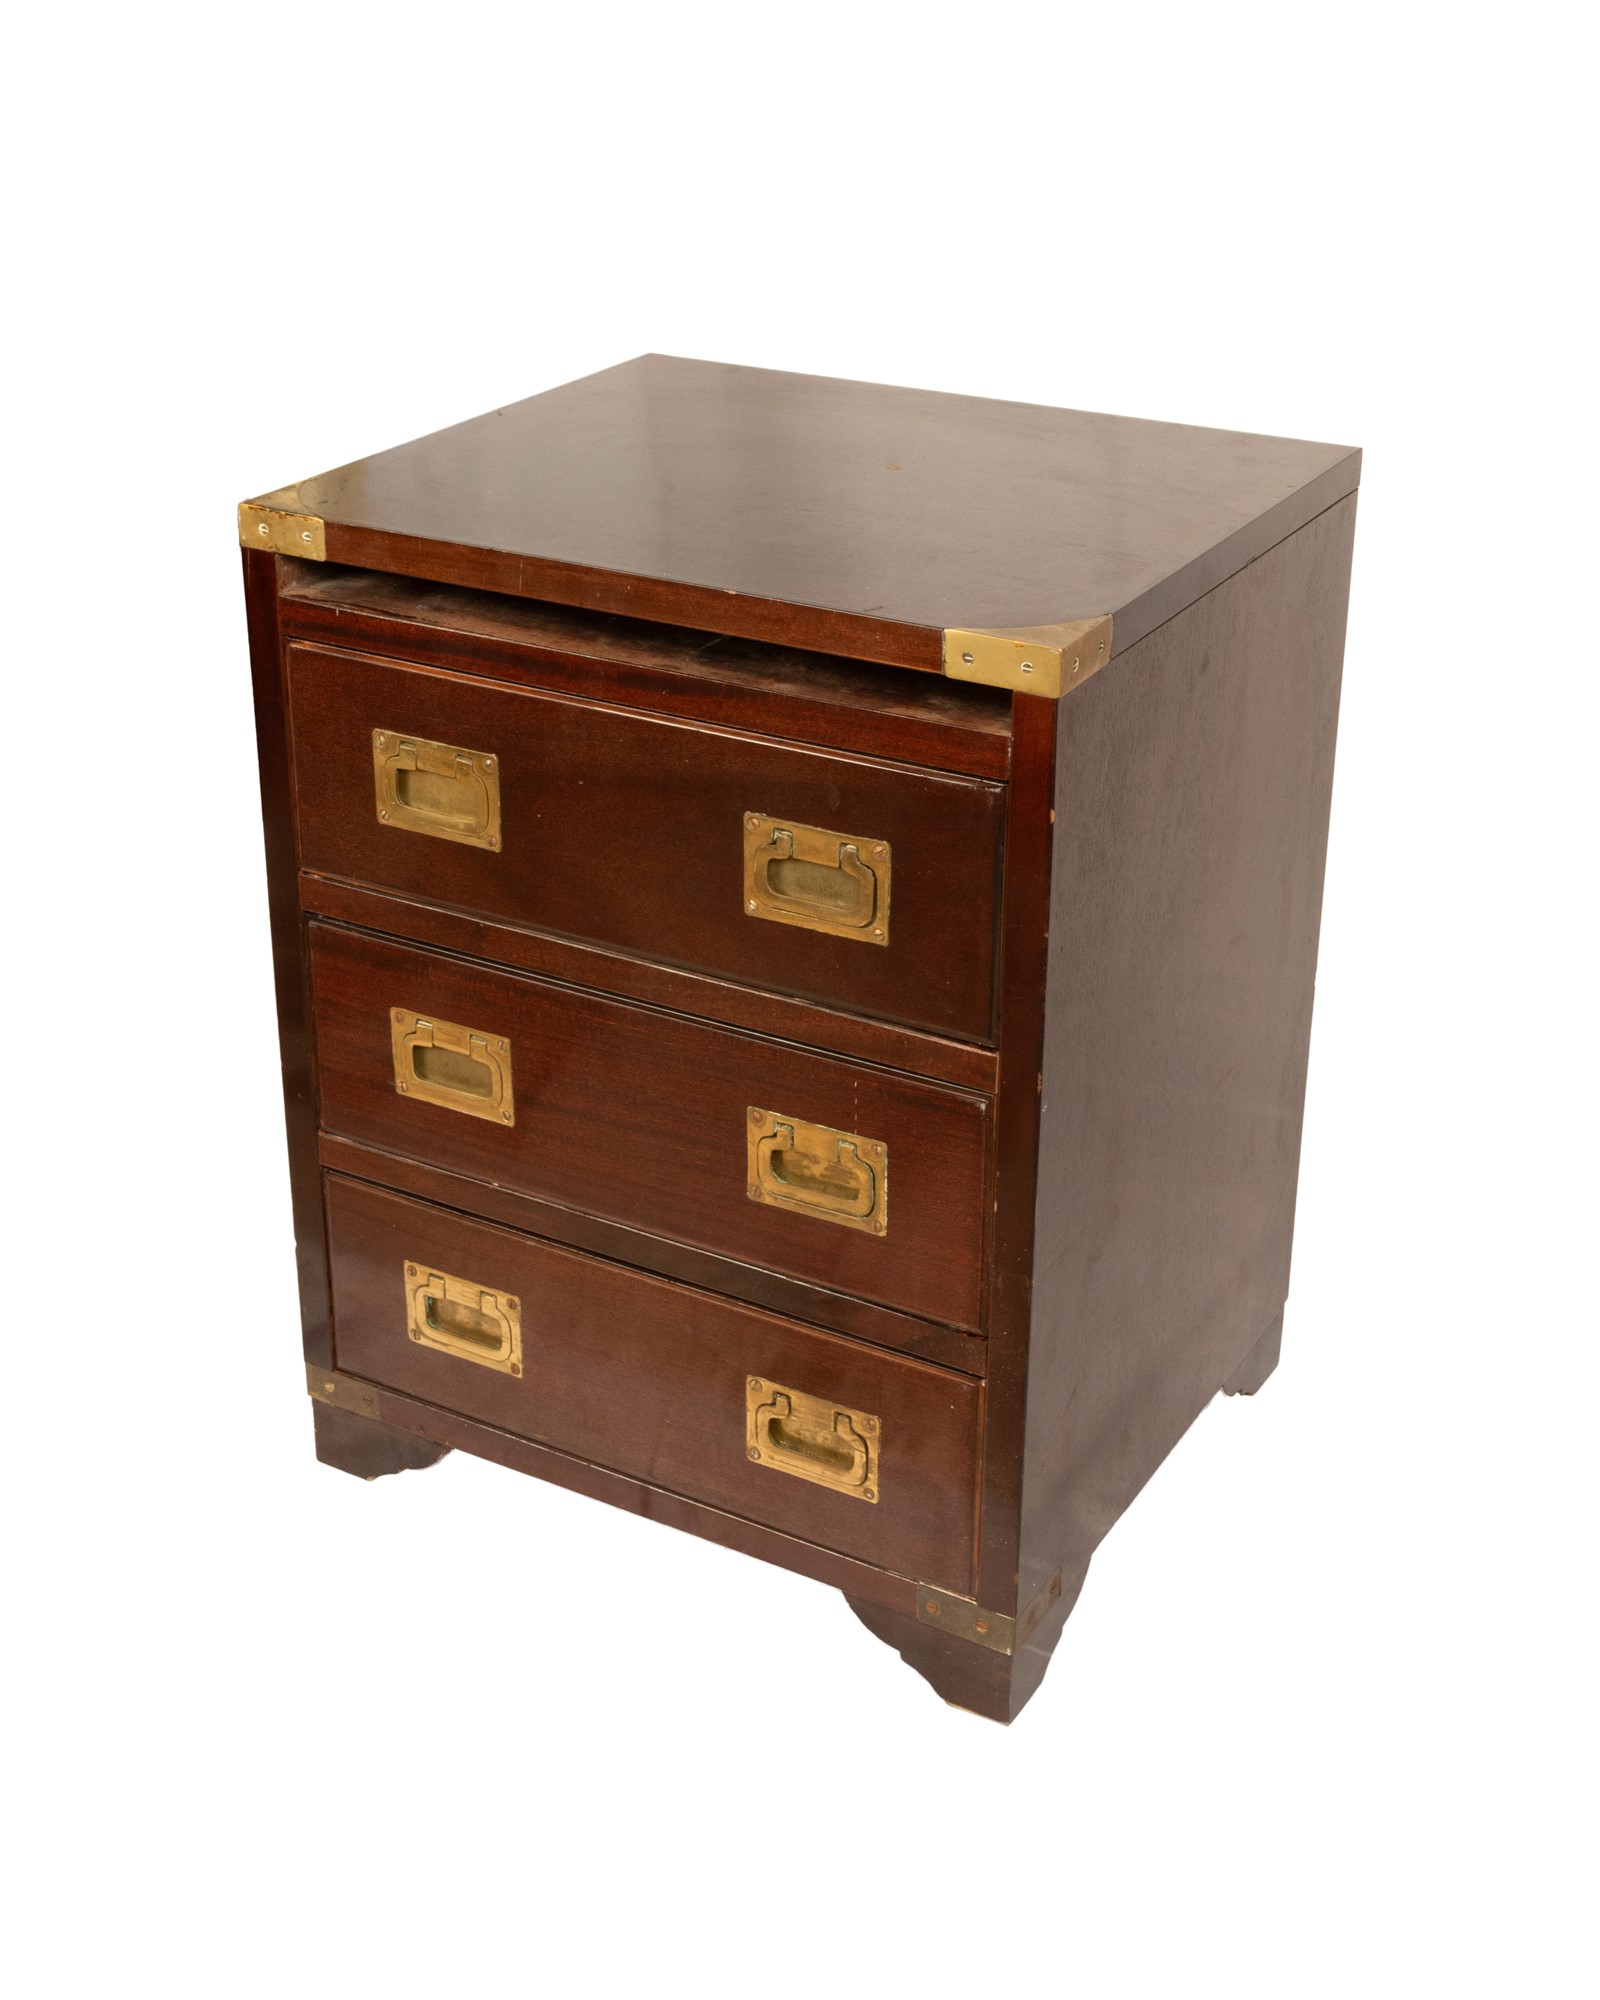 Antica Marina wooden bedside table with brass inserts - Image 2 of 23